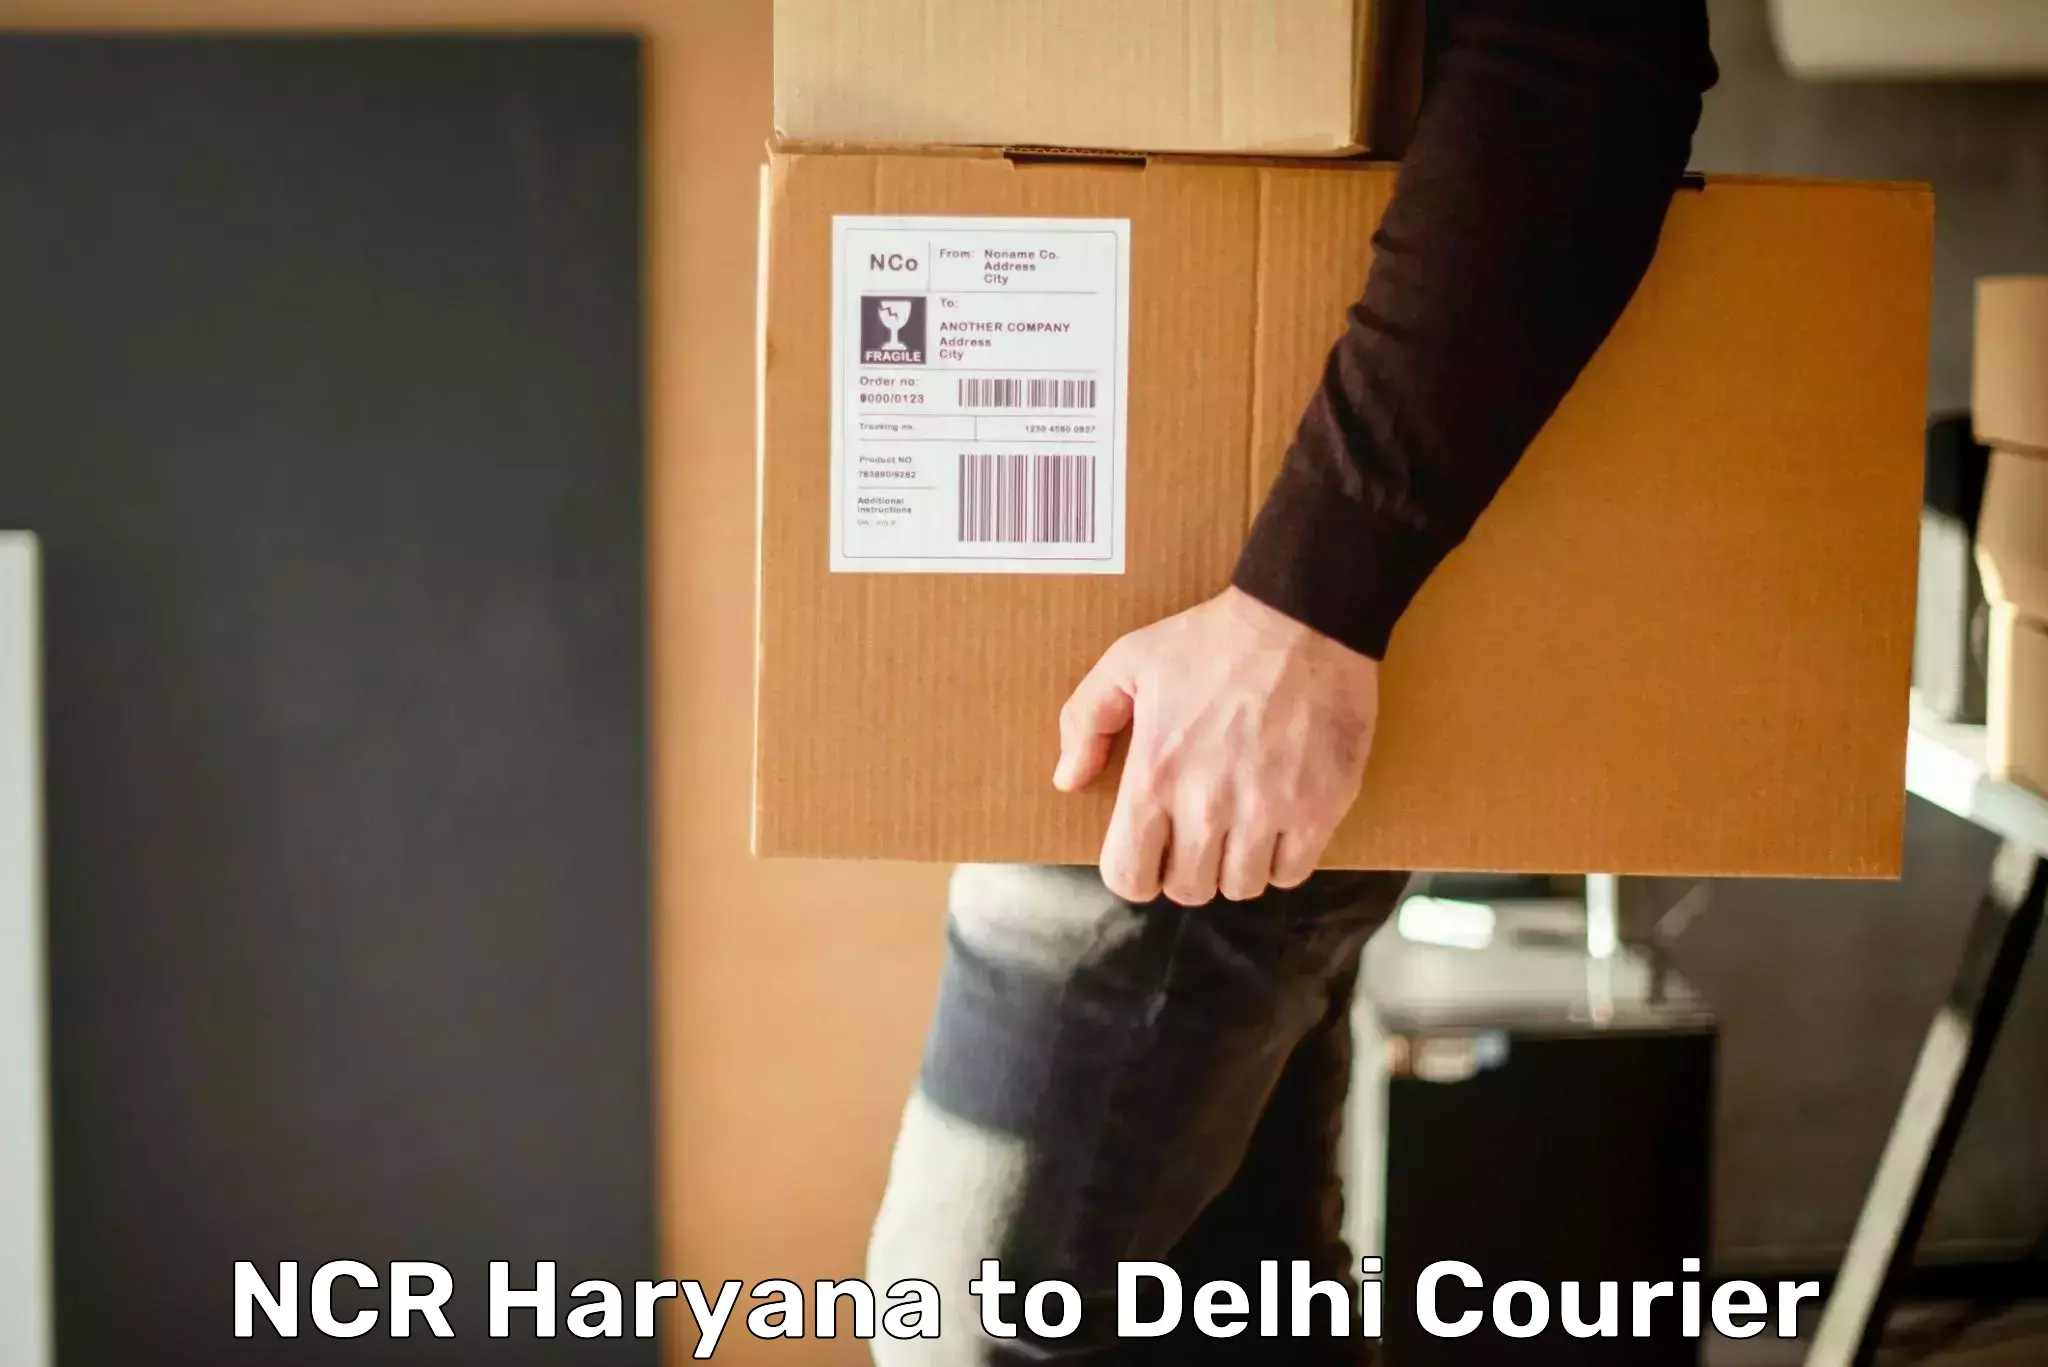 Courier insurance NCR Haryana to Lodhi Road